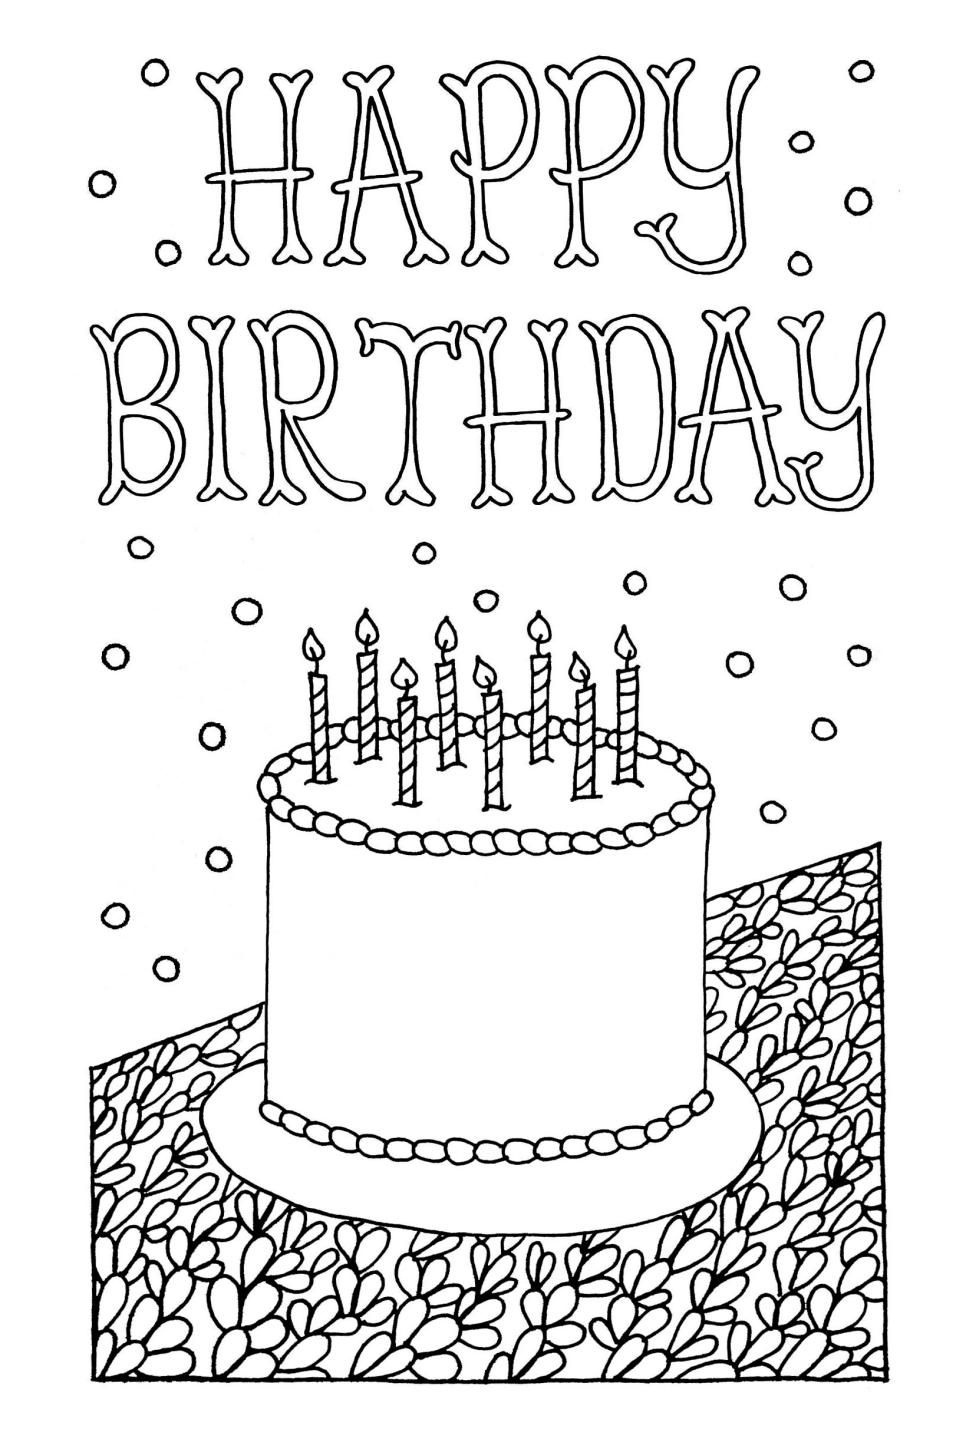 Free Downloadable Adult Coloring Greeting Cards | Diy Gifts | Happy - Free Printable Birthday Cards To Color